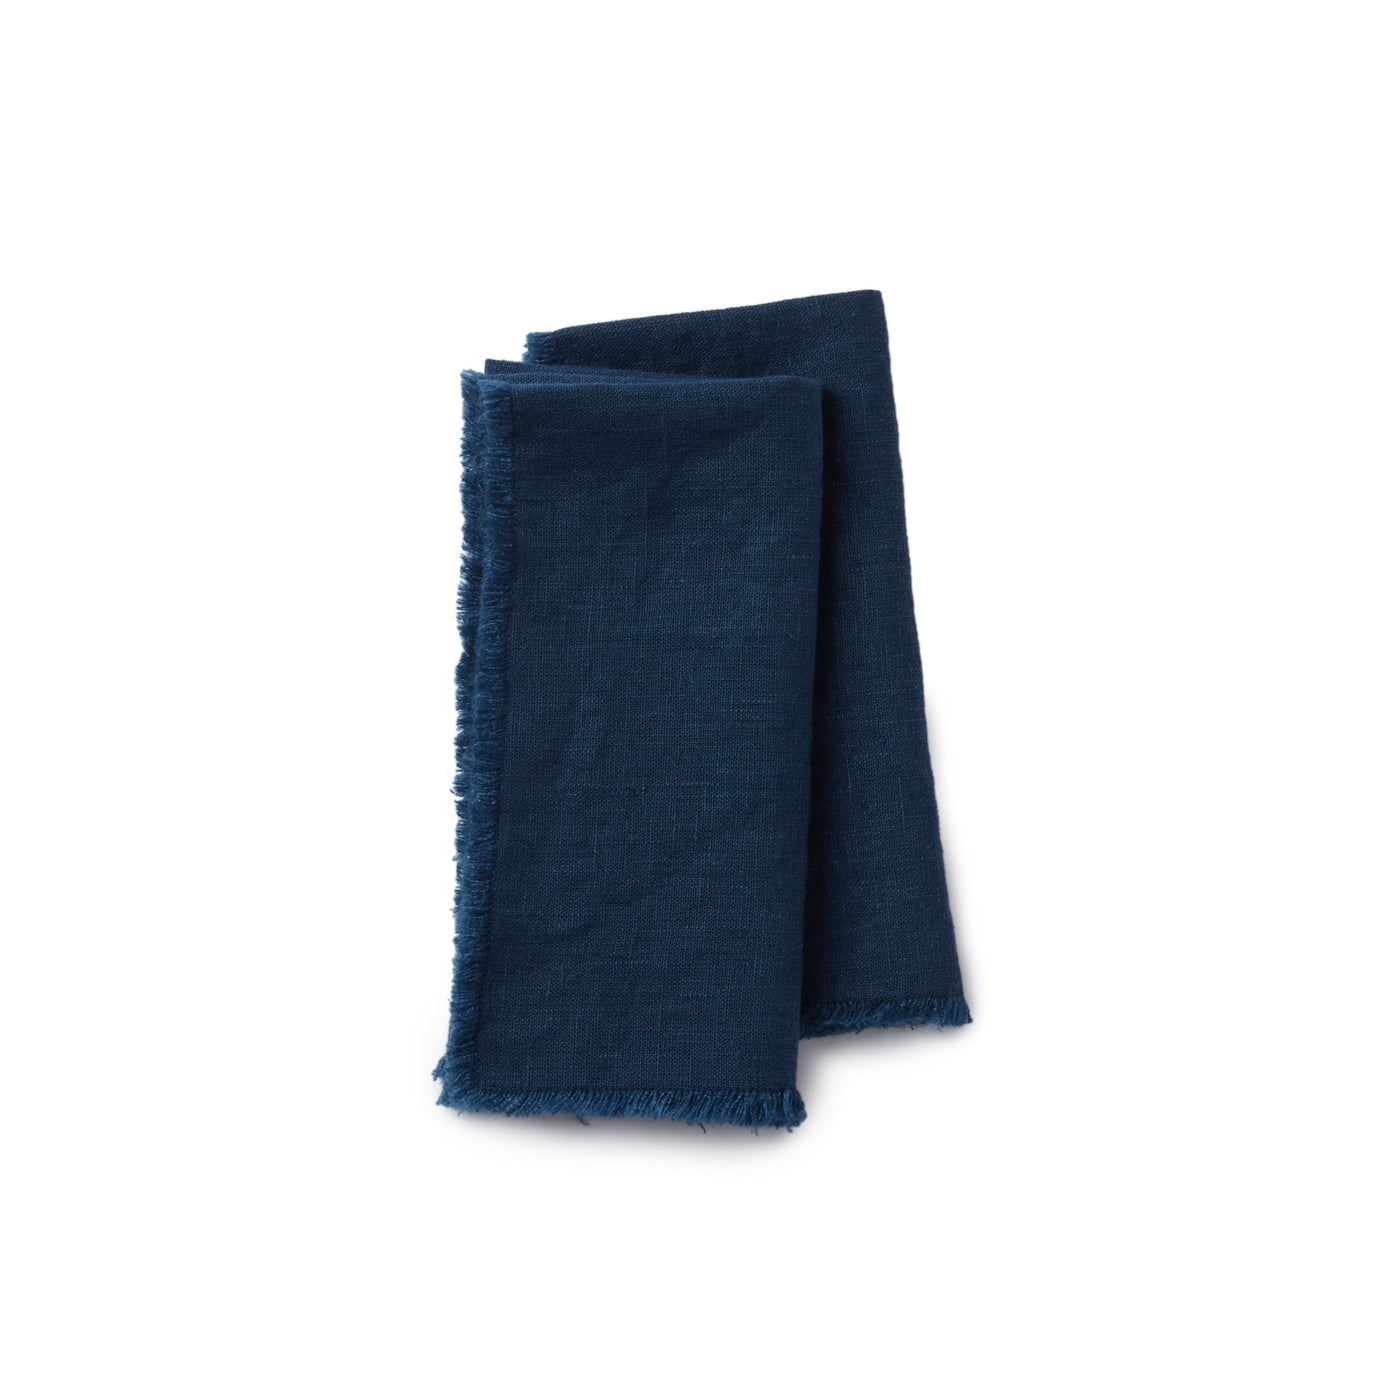 Linen Napkins with Fringes in Navy - Set of 2